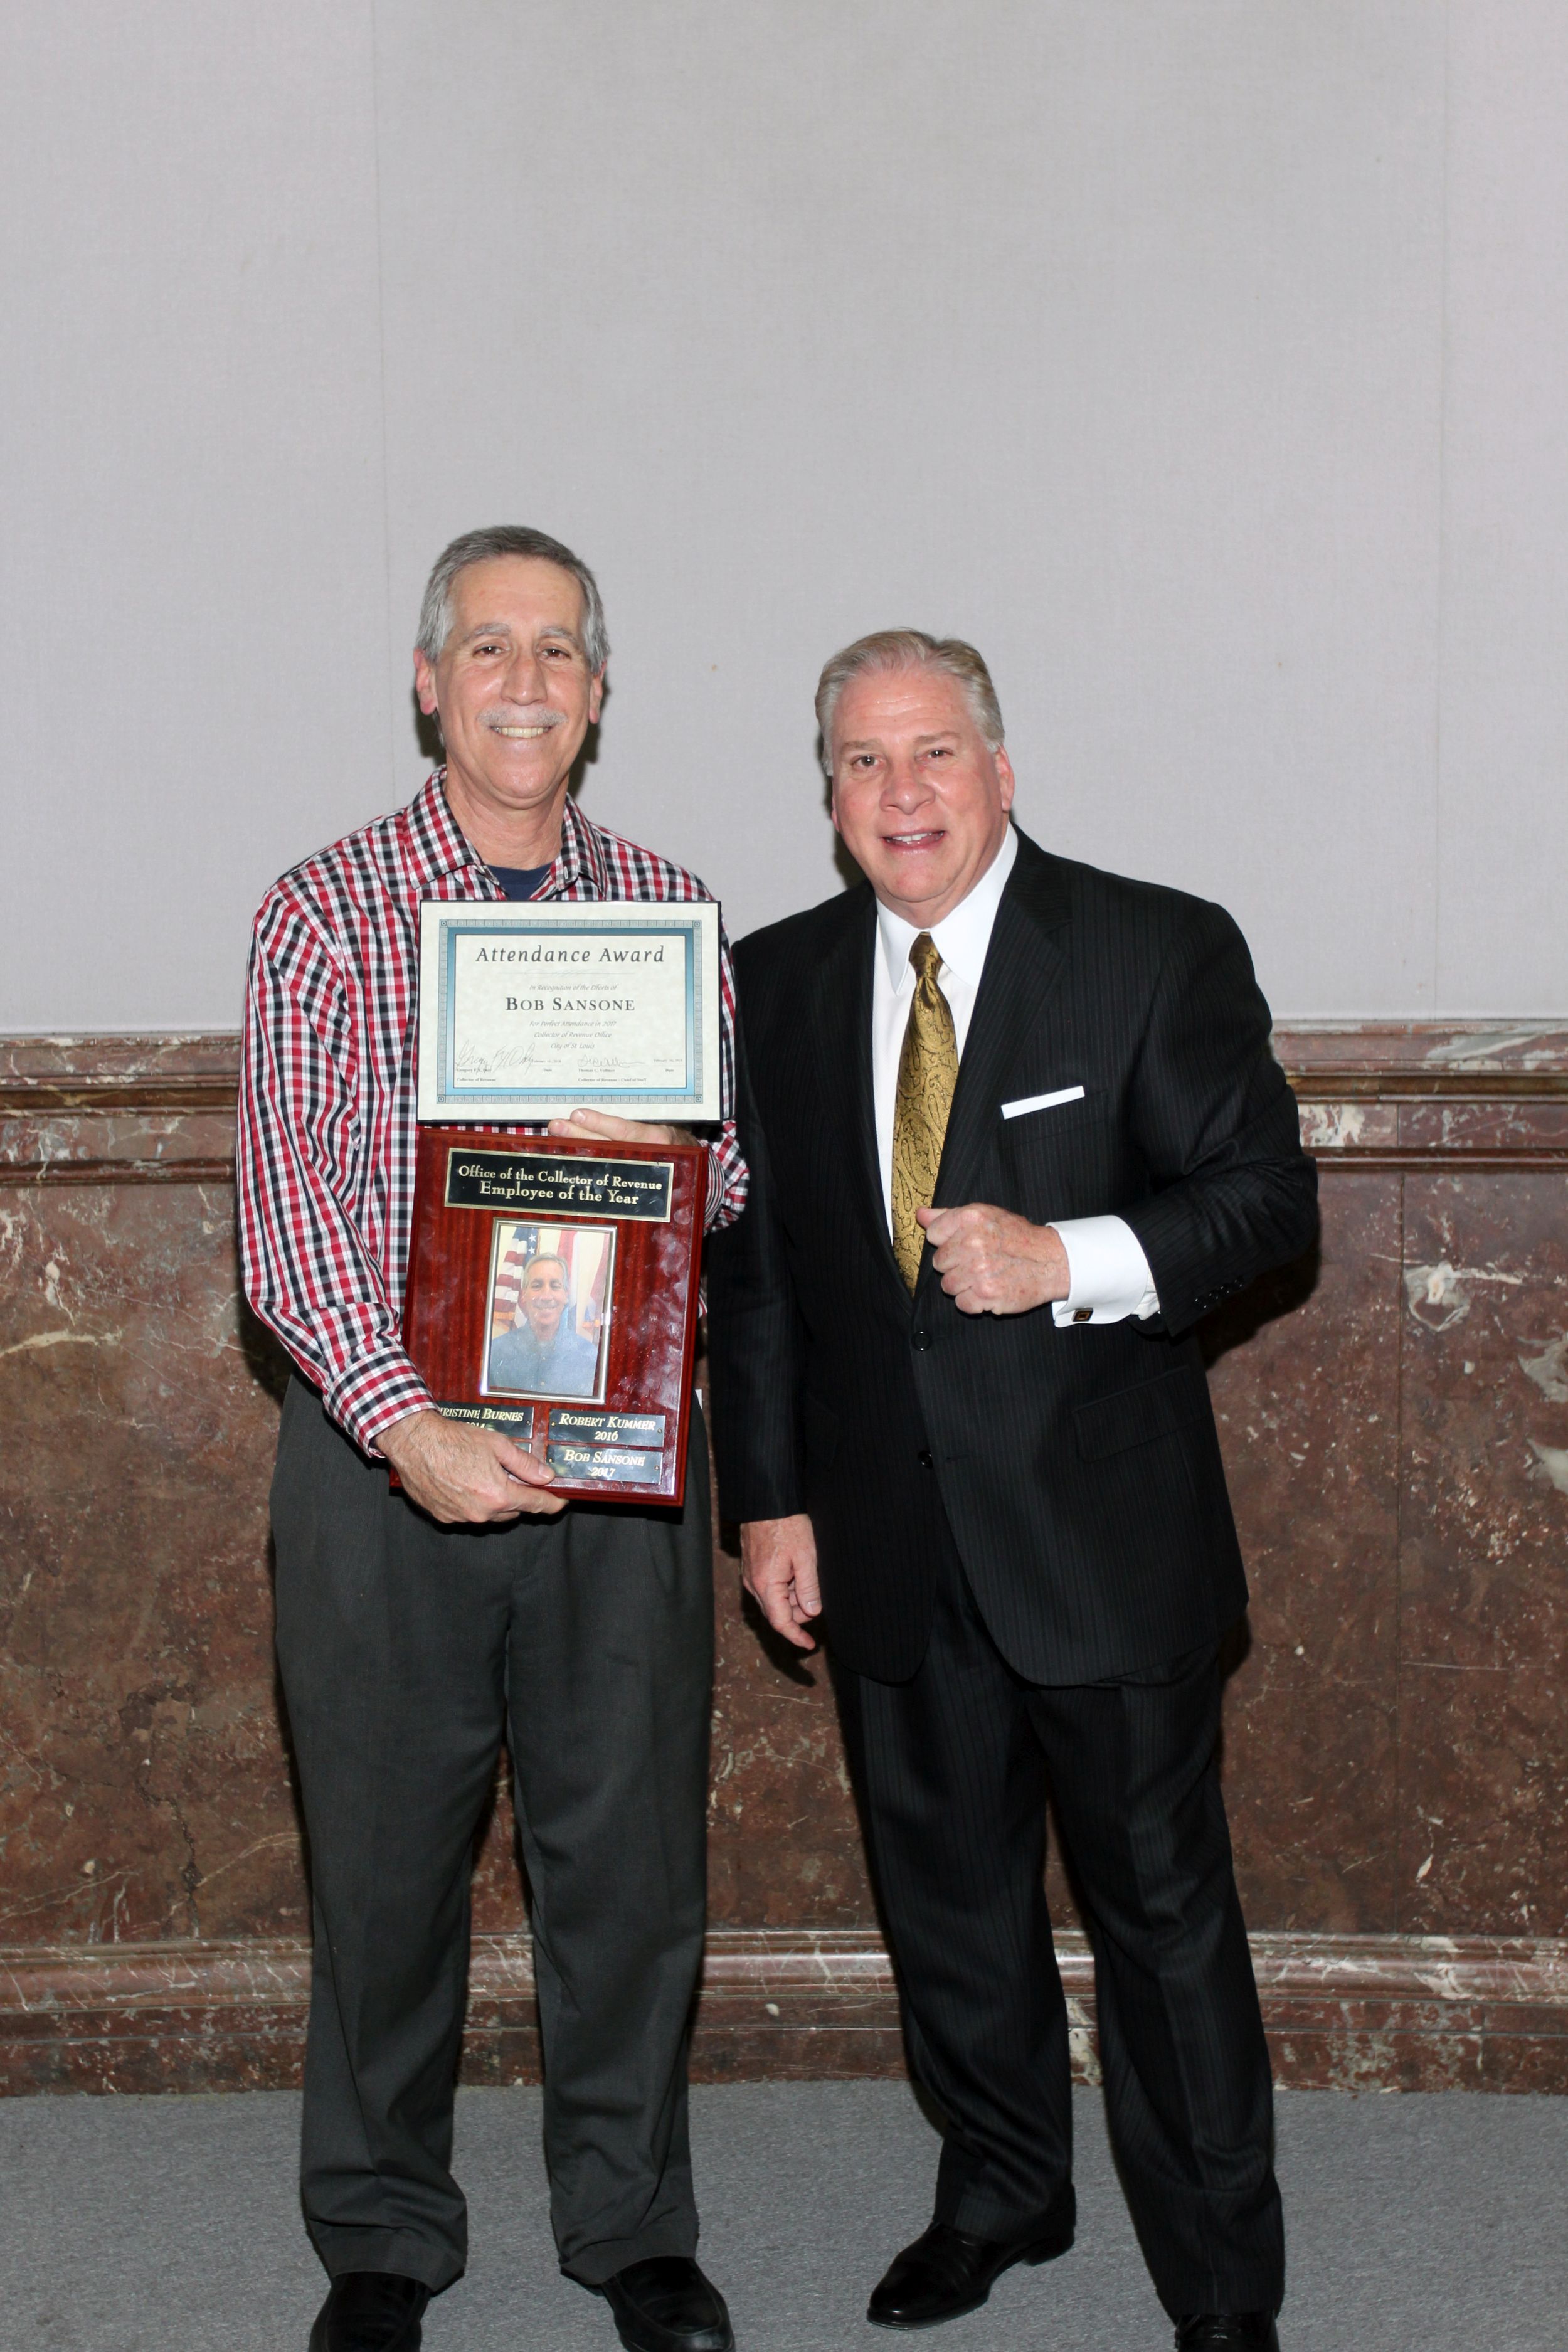 Bob Sansone receives the 2017 Employee of the Year Award from Collector of Revenue Gregory F.X. Daly on Feb. 16, 2018.